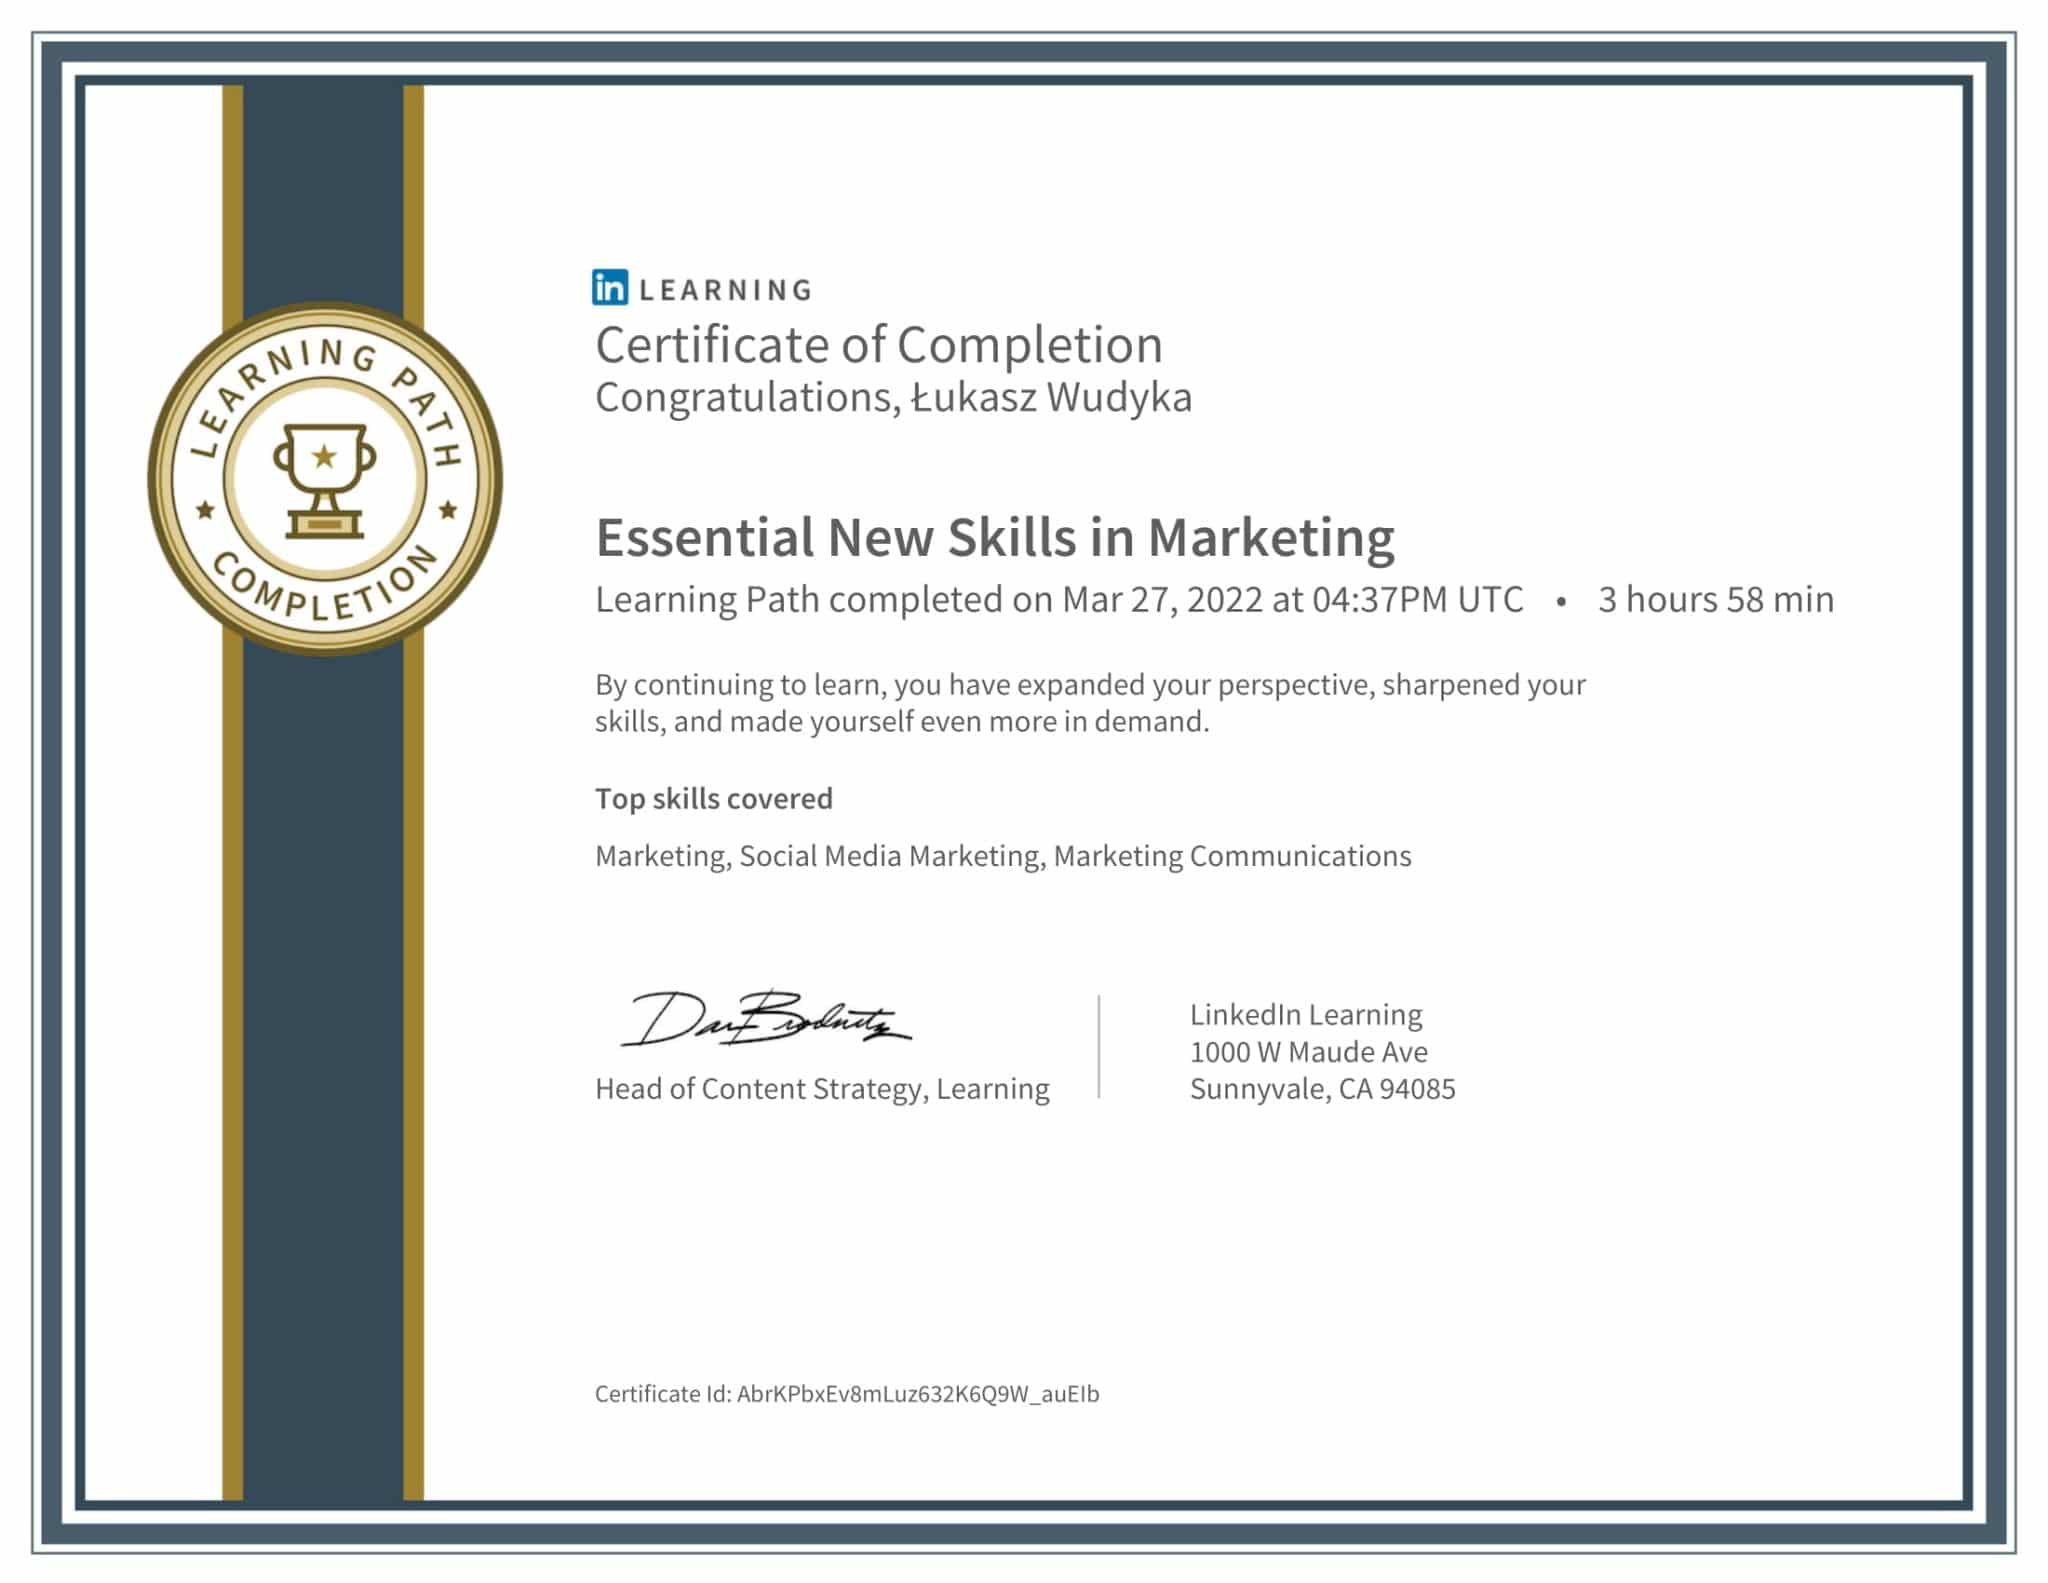 CertificateOfCompletion_Essential New Skills in Marketing-1